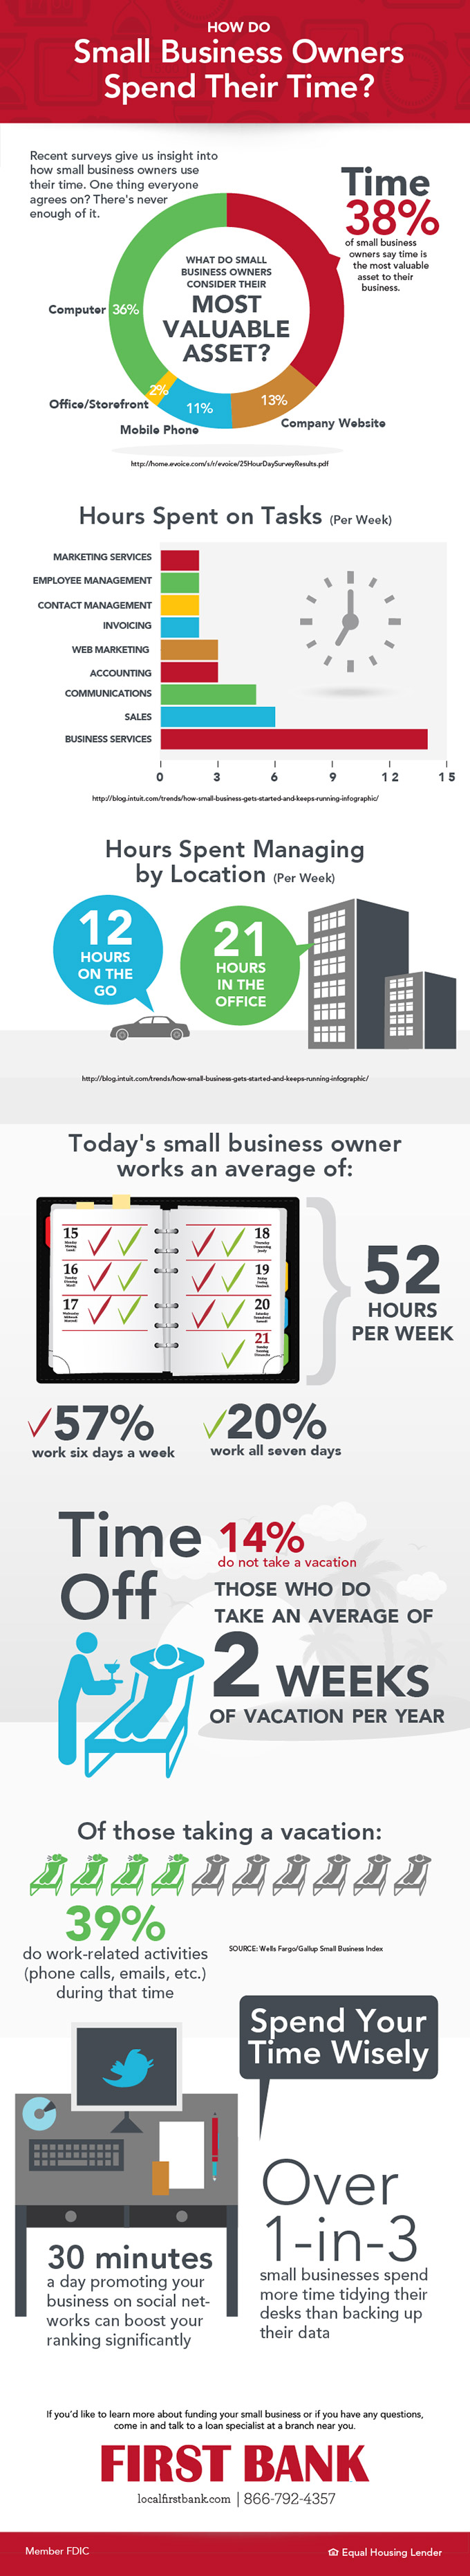 How Do Small Business Owners Spend Their Time? [INFOGRAPHIC]